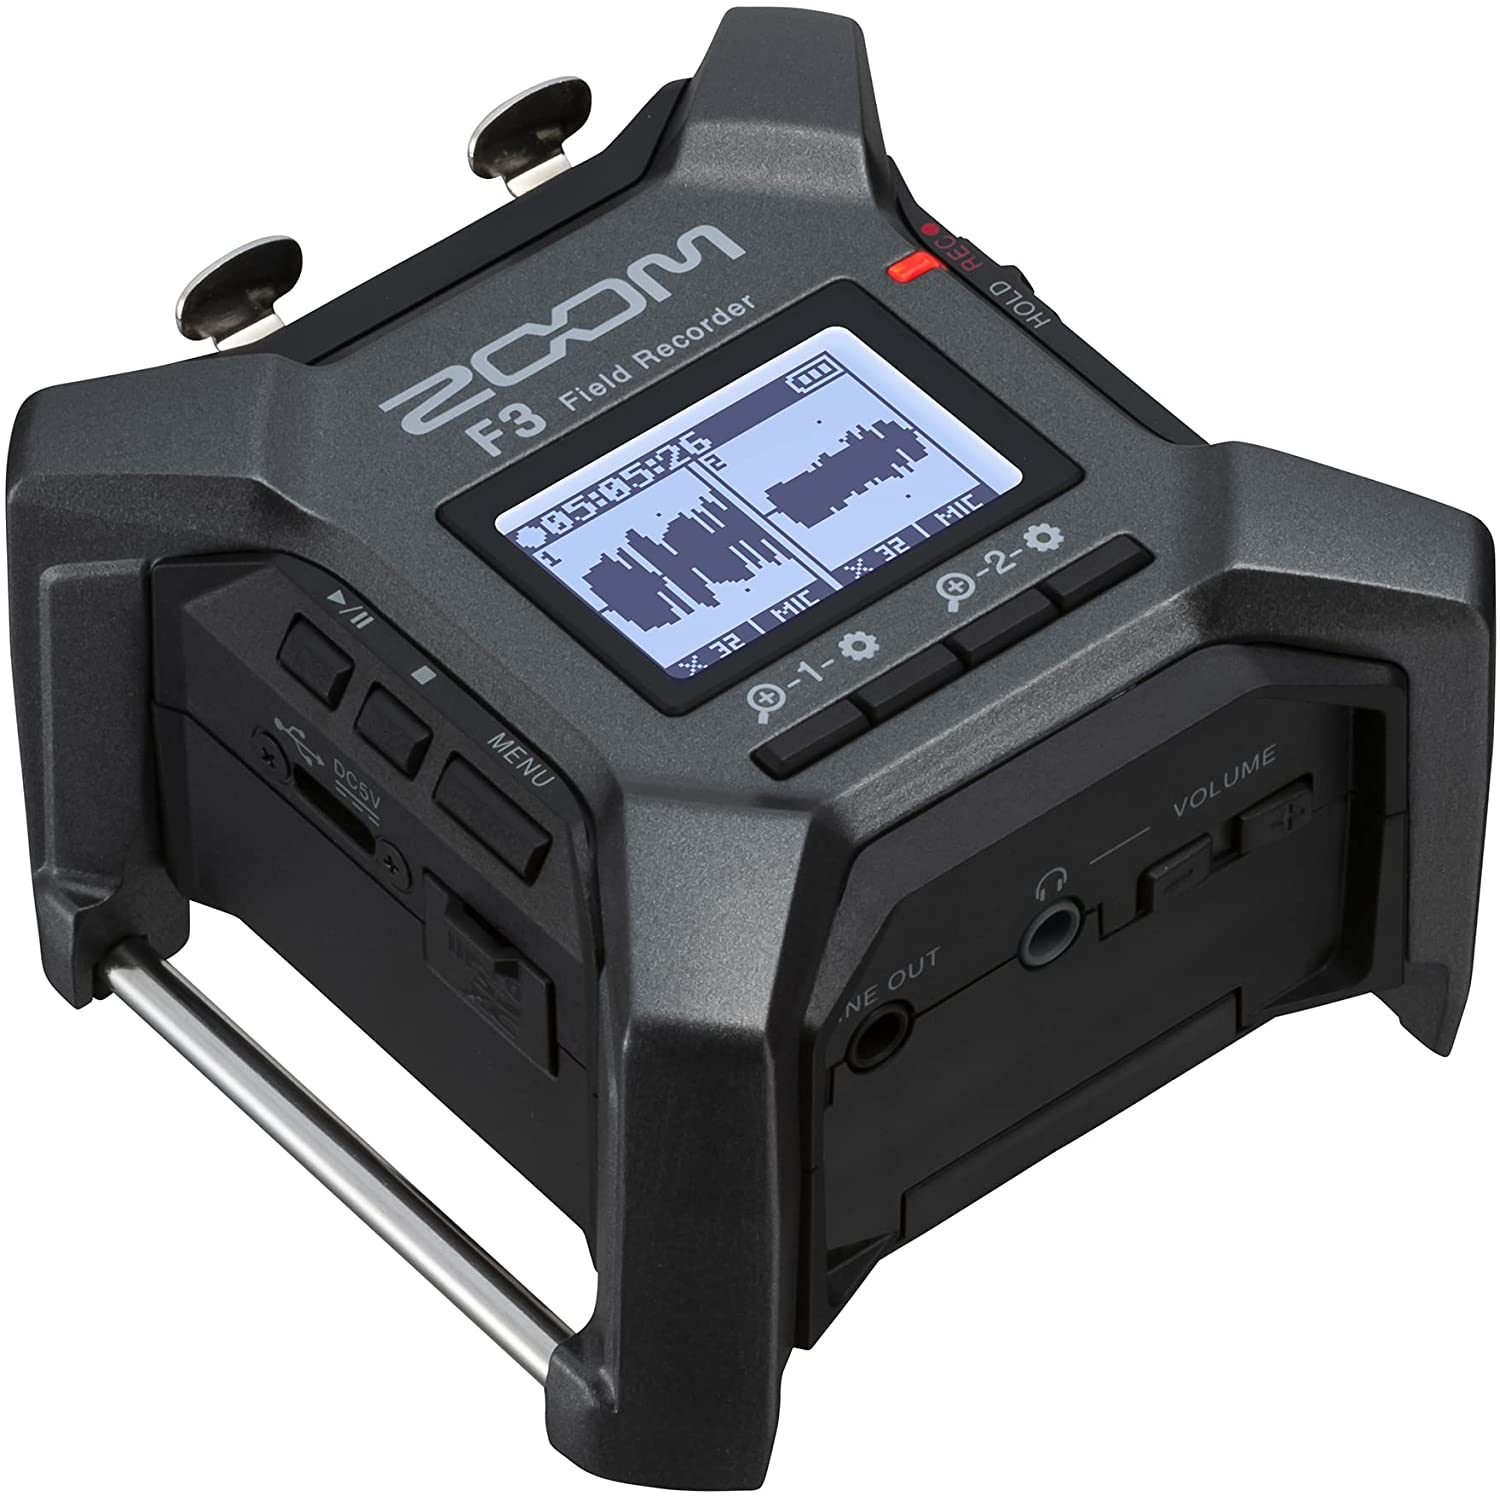 First look: Zoom F3 2-track 32-bit float recorder with 48 kHz sampling rate 4